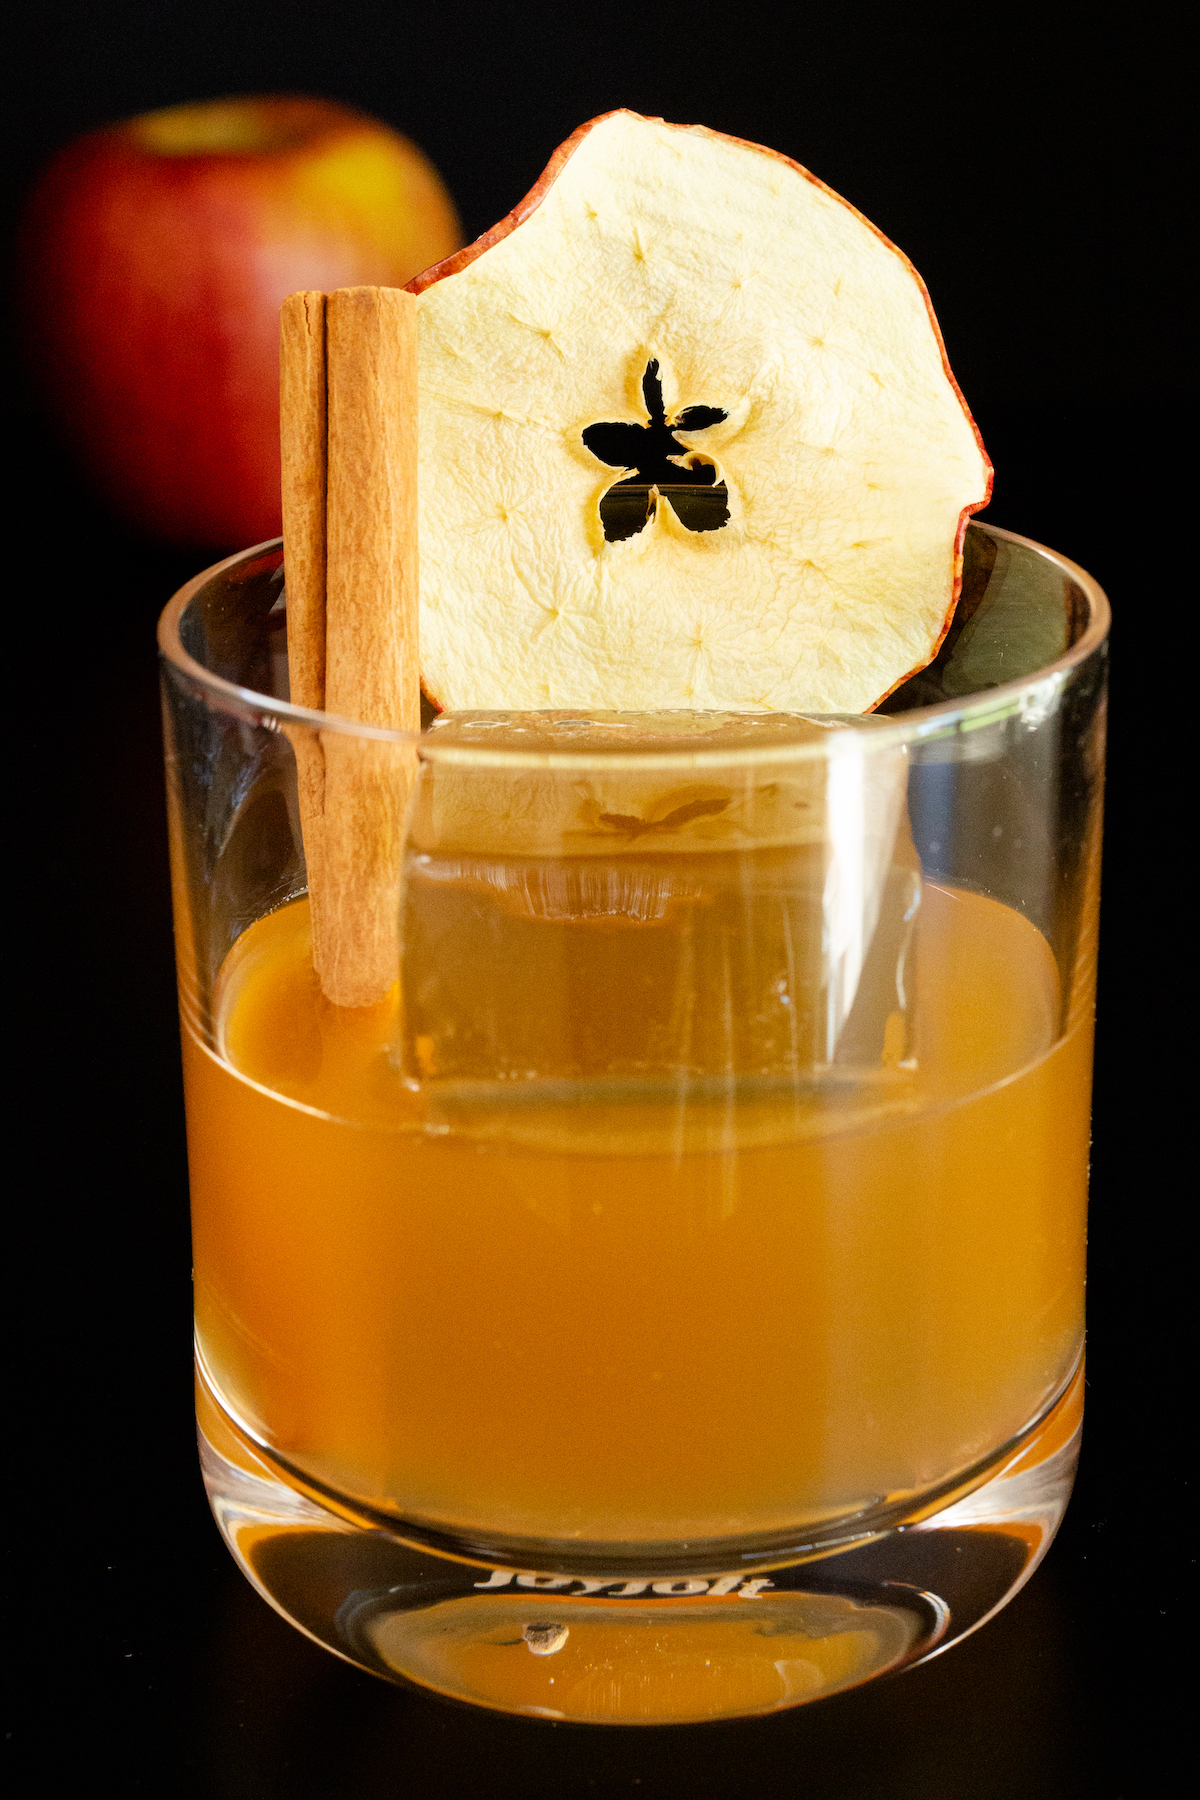 A lowball glass has been filled with a brown Apple Old Fashioned and a large clear block of ice. It is garnished with a dehydrated apple slice and a cinnamon stick.